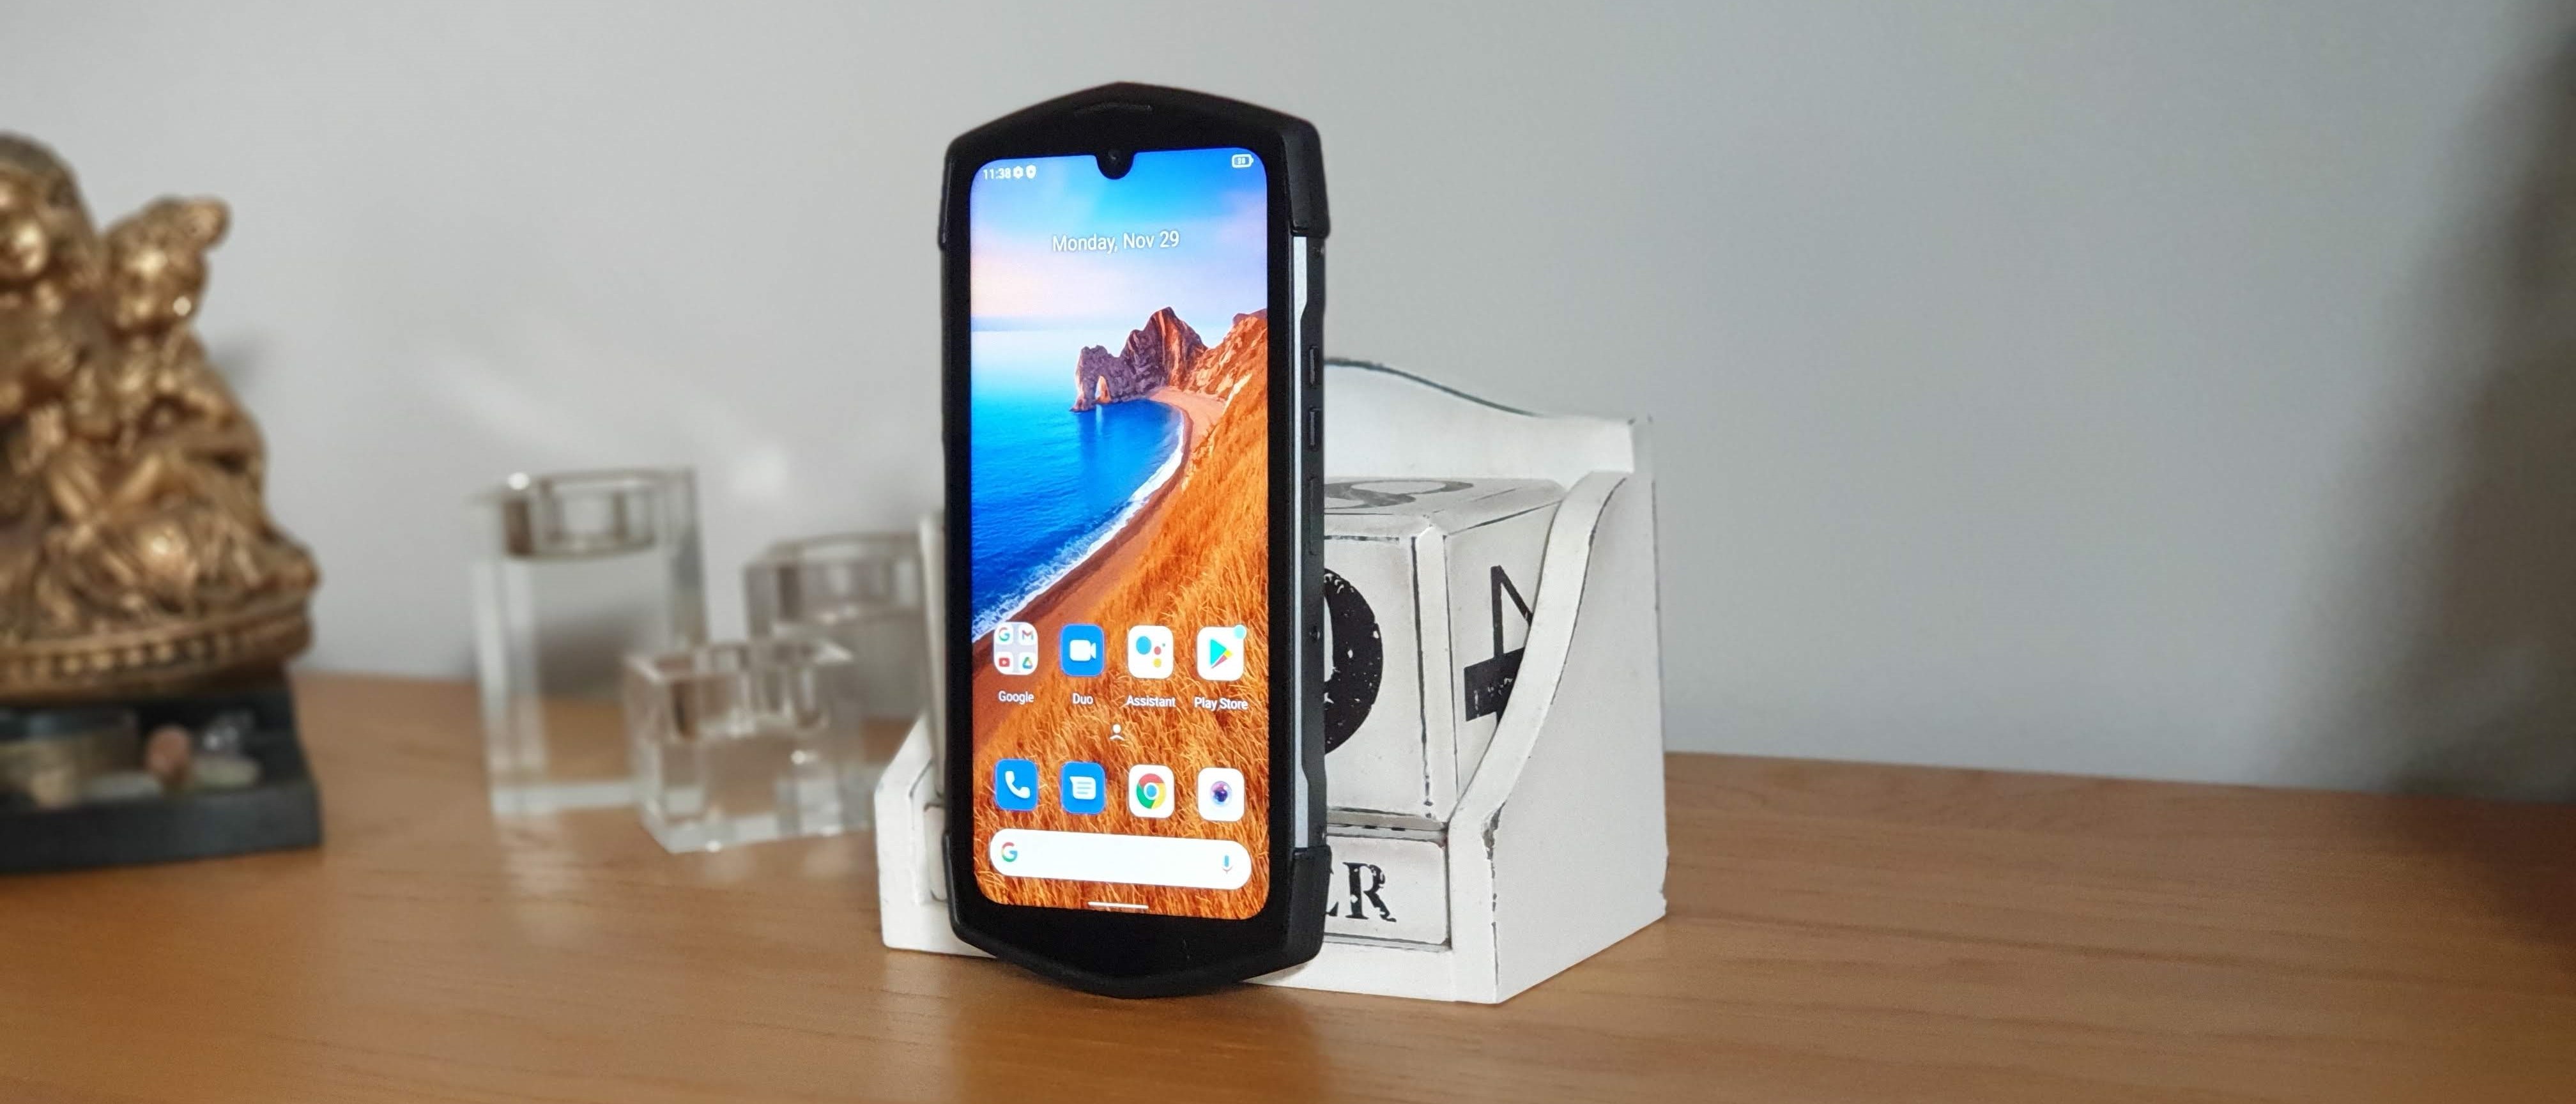 Unihertz TickTock first look: 5G rugged phone with unique rear